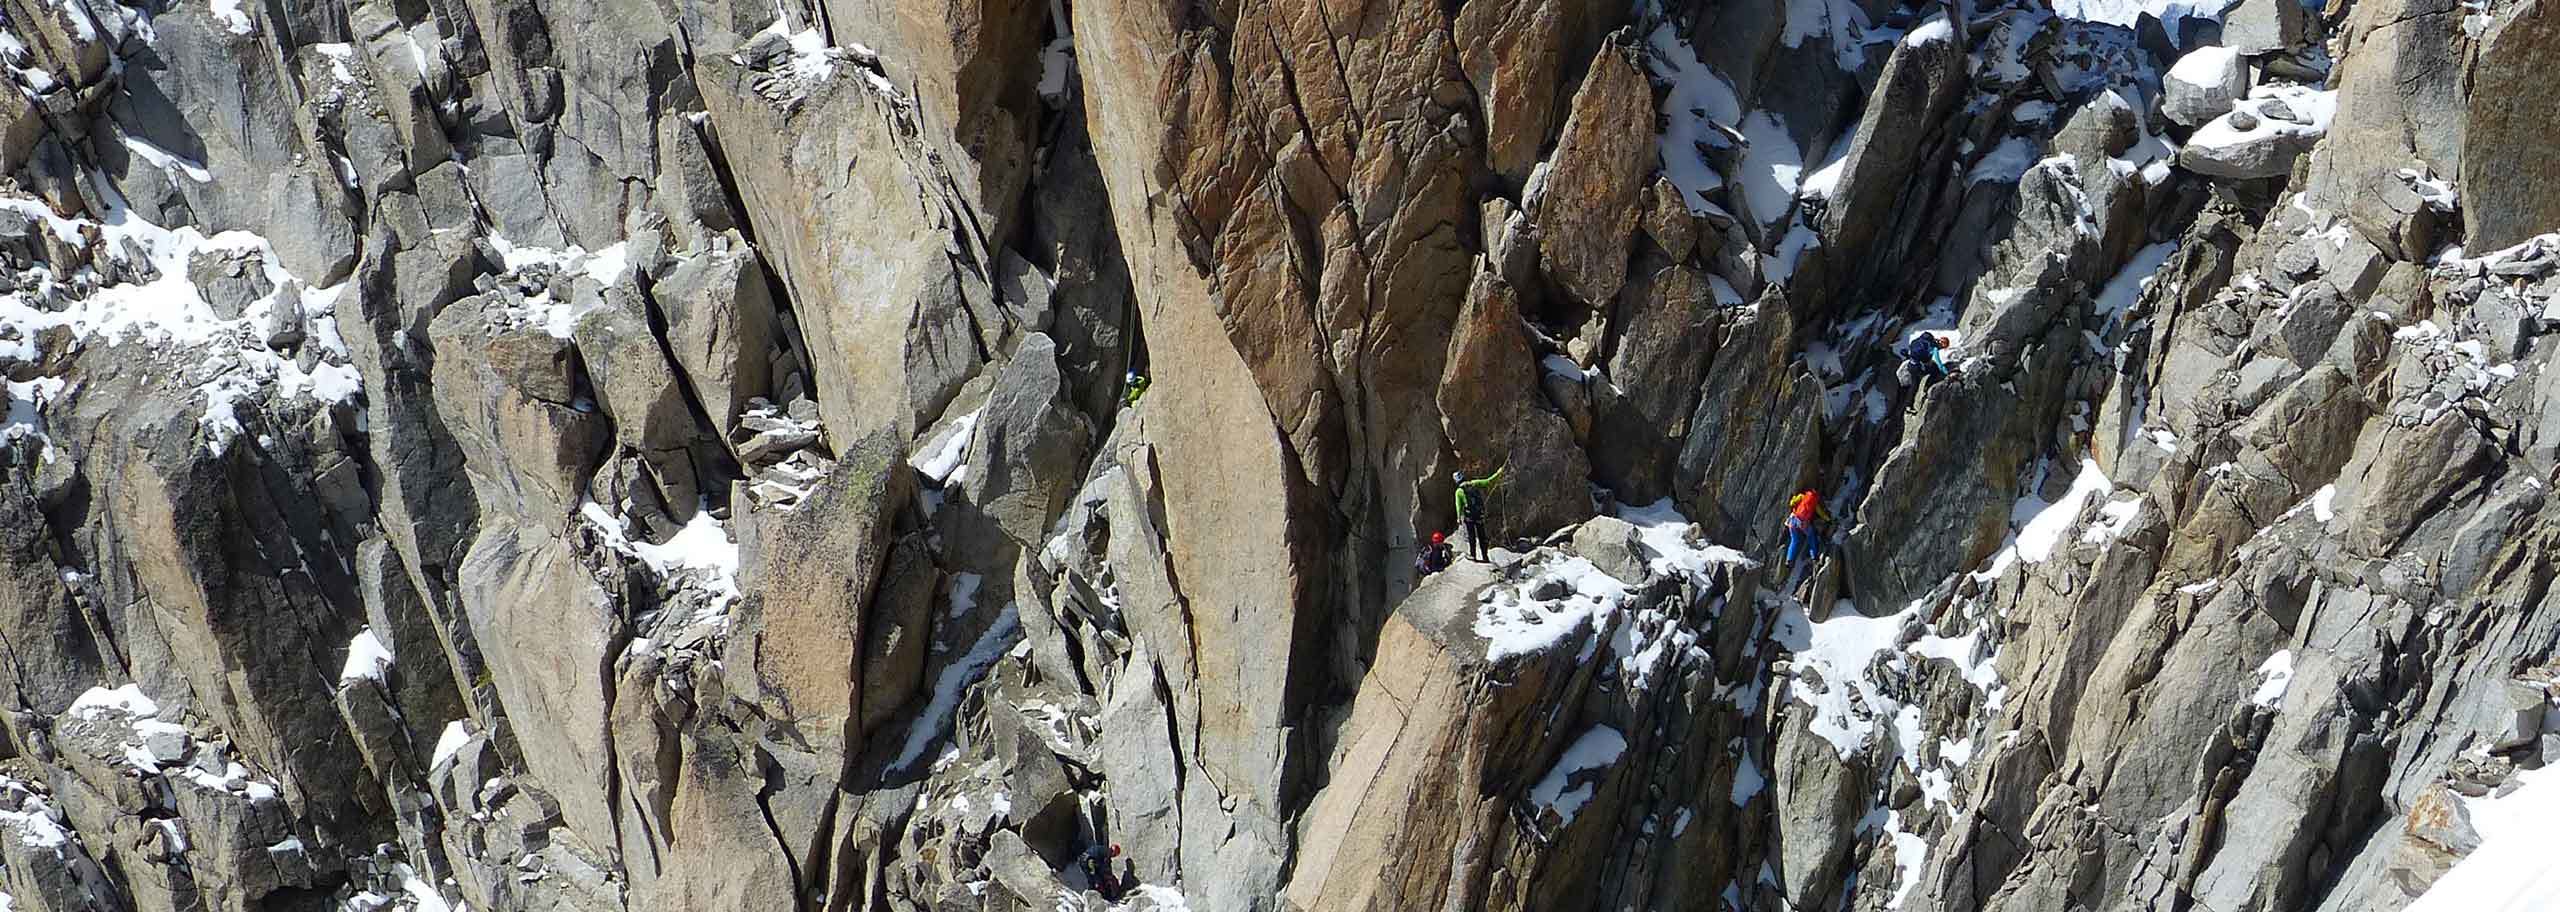 Rock Climbing in Gran Paradiso National Park, Mountain Guide in Cogne